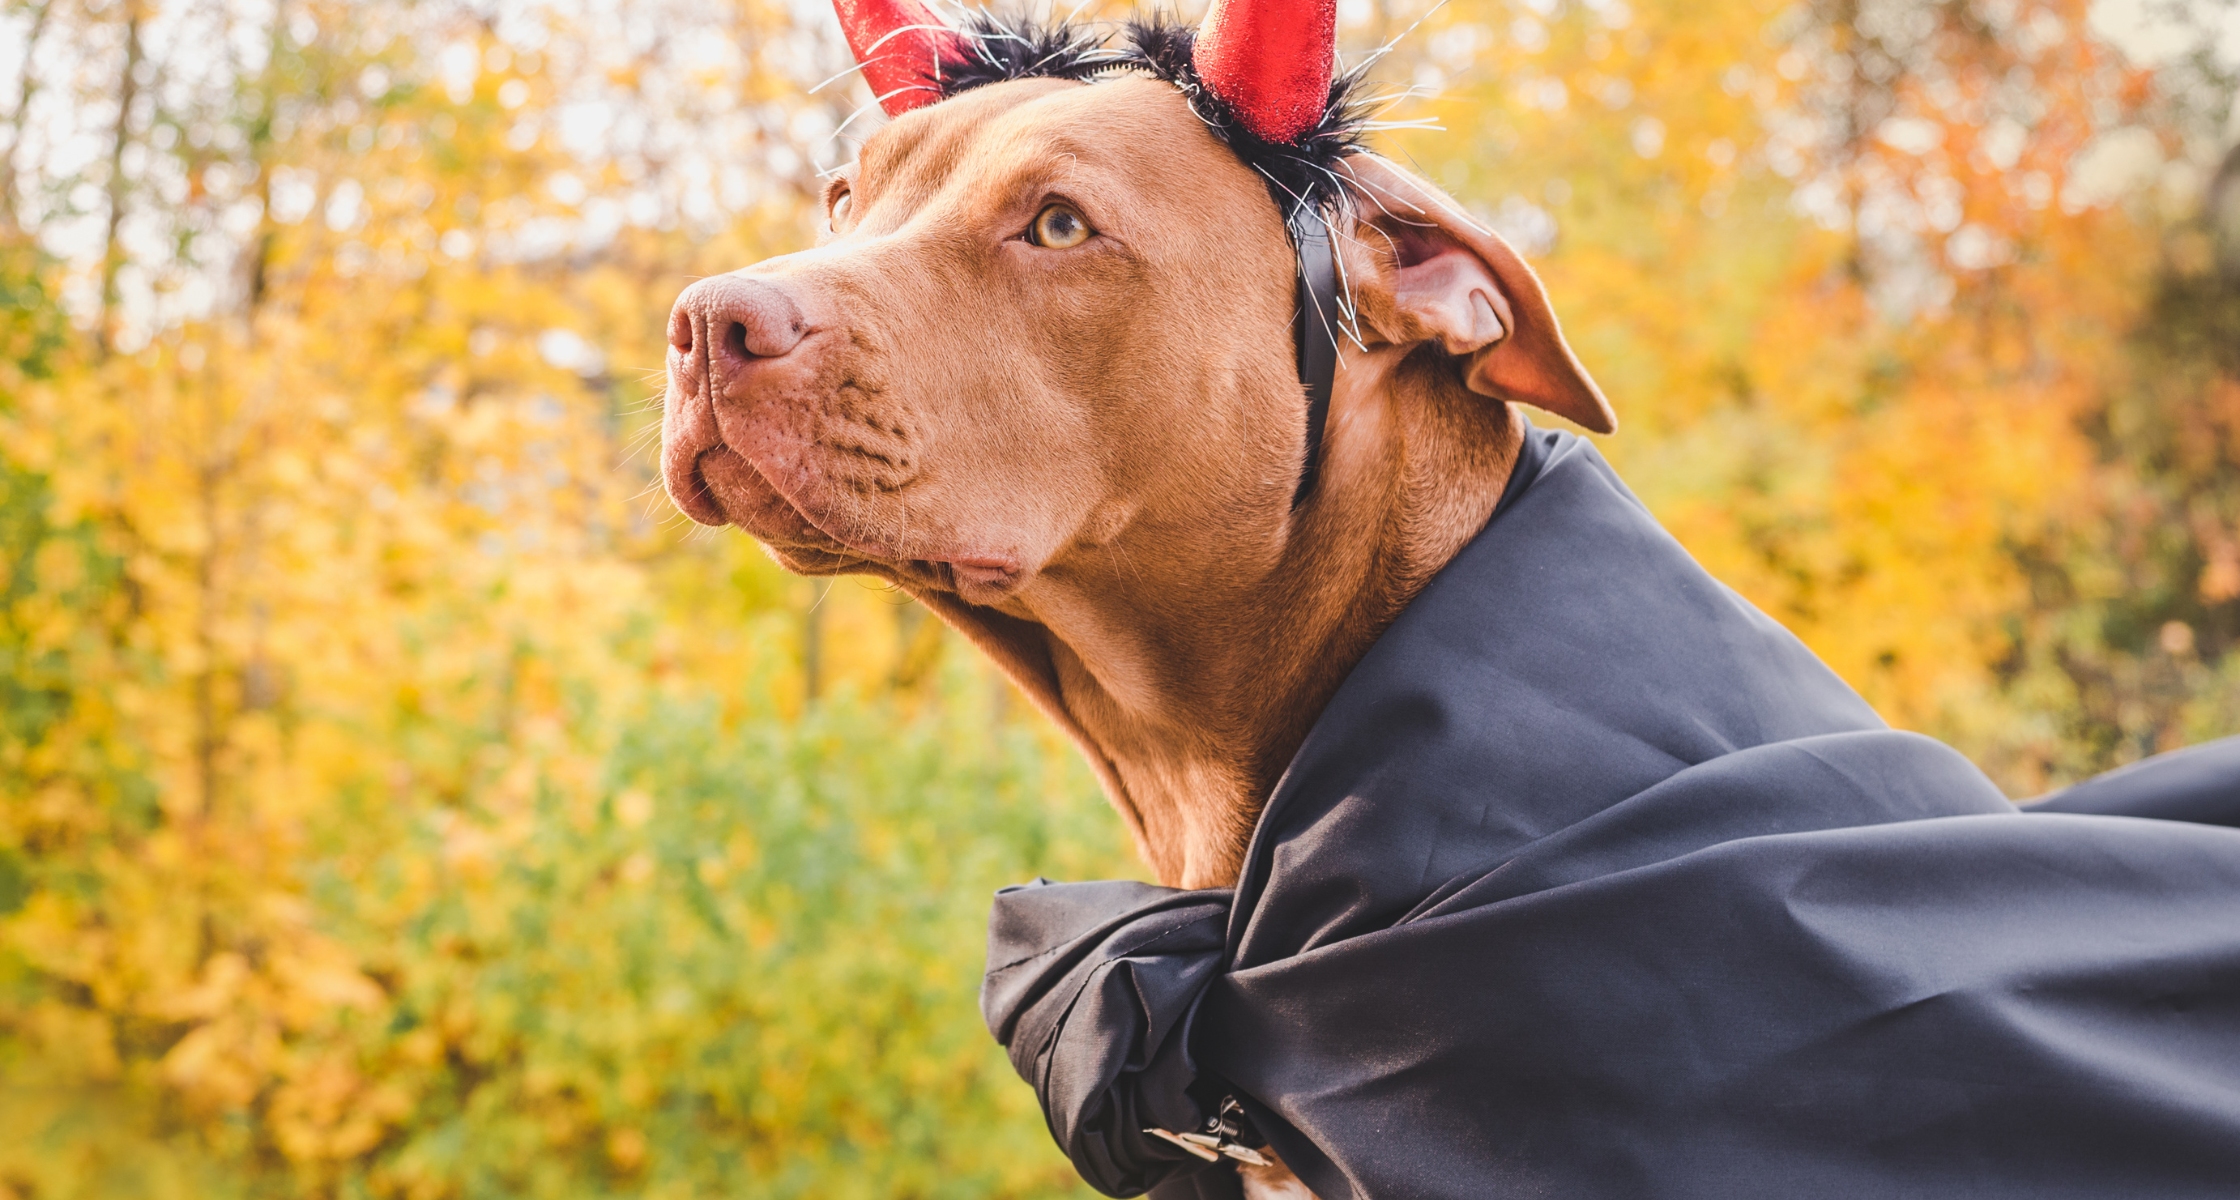 Halloween Safety Tips for Pets: Tricks and Treats to Keep Them Safe